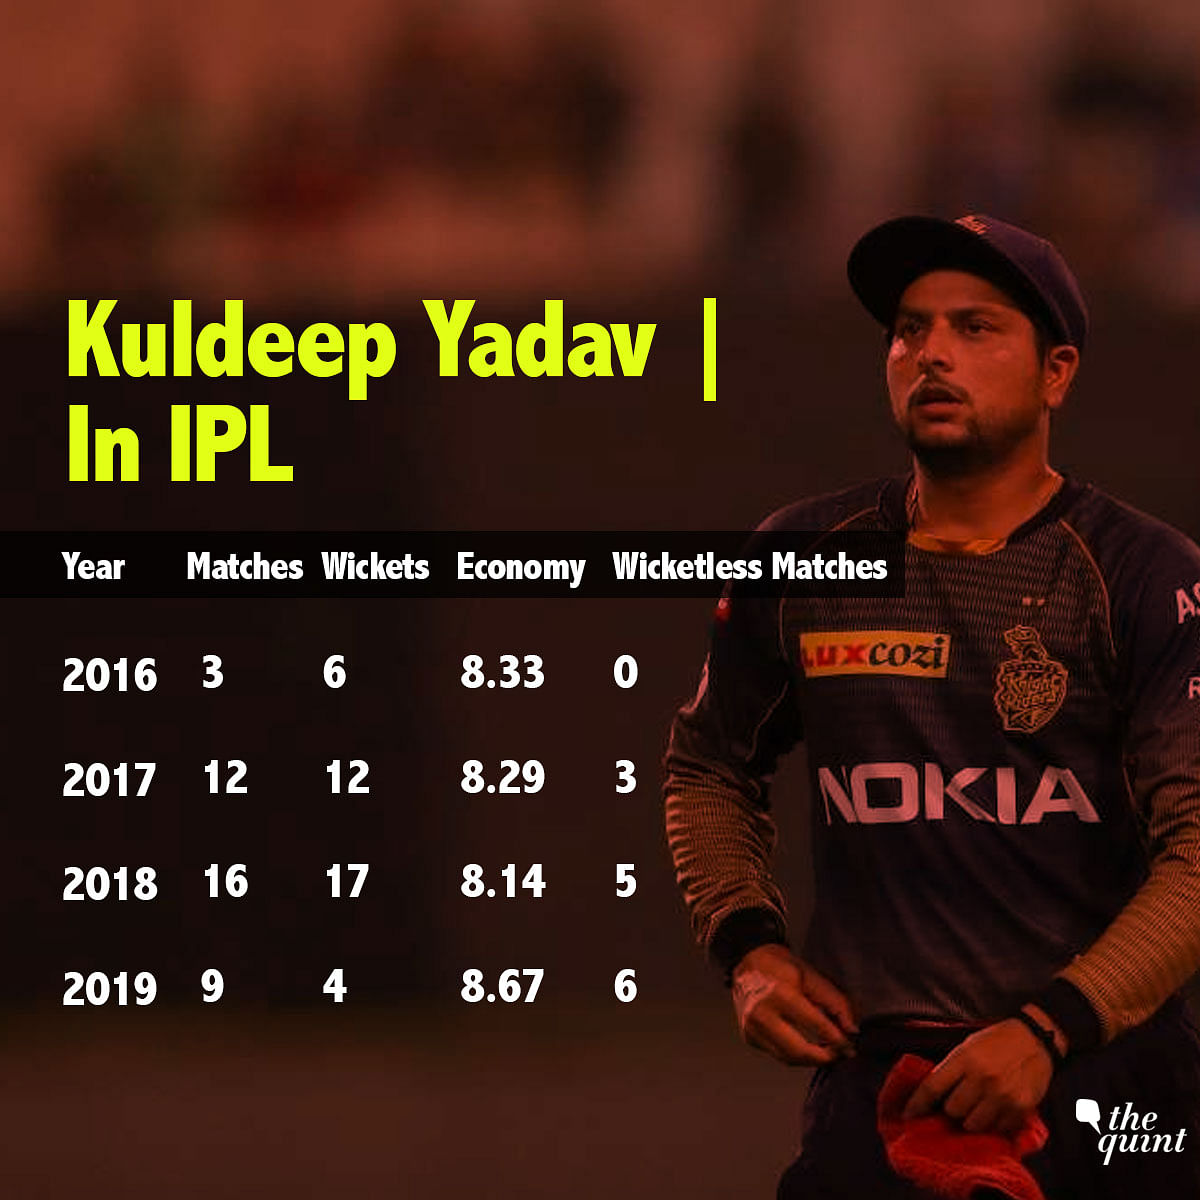 Never previously, not even in a completed IPL season, had Kuldeep Yadav gone wicket-less in 6 matches.